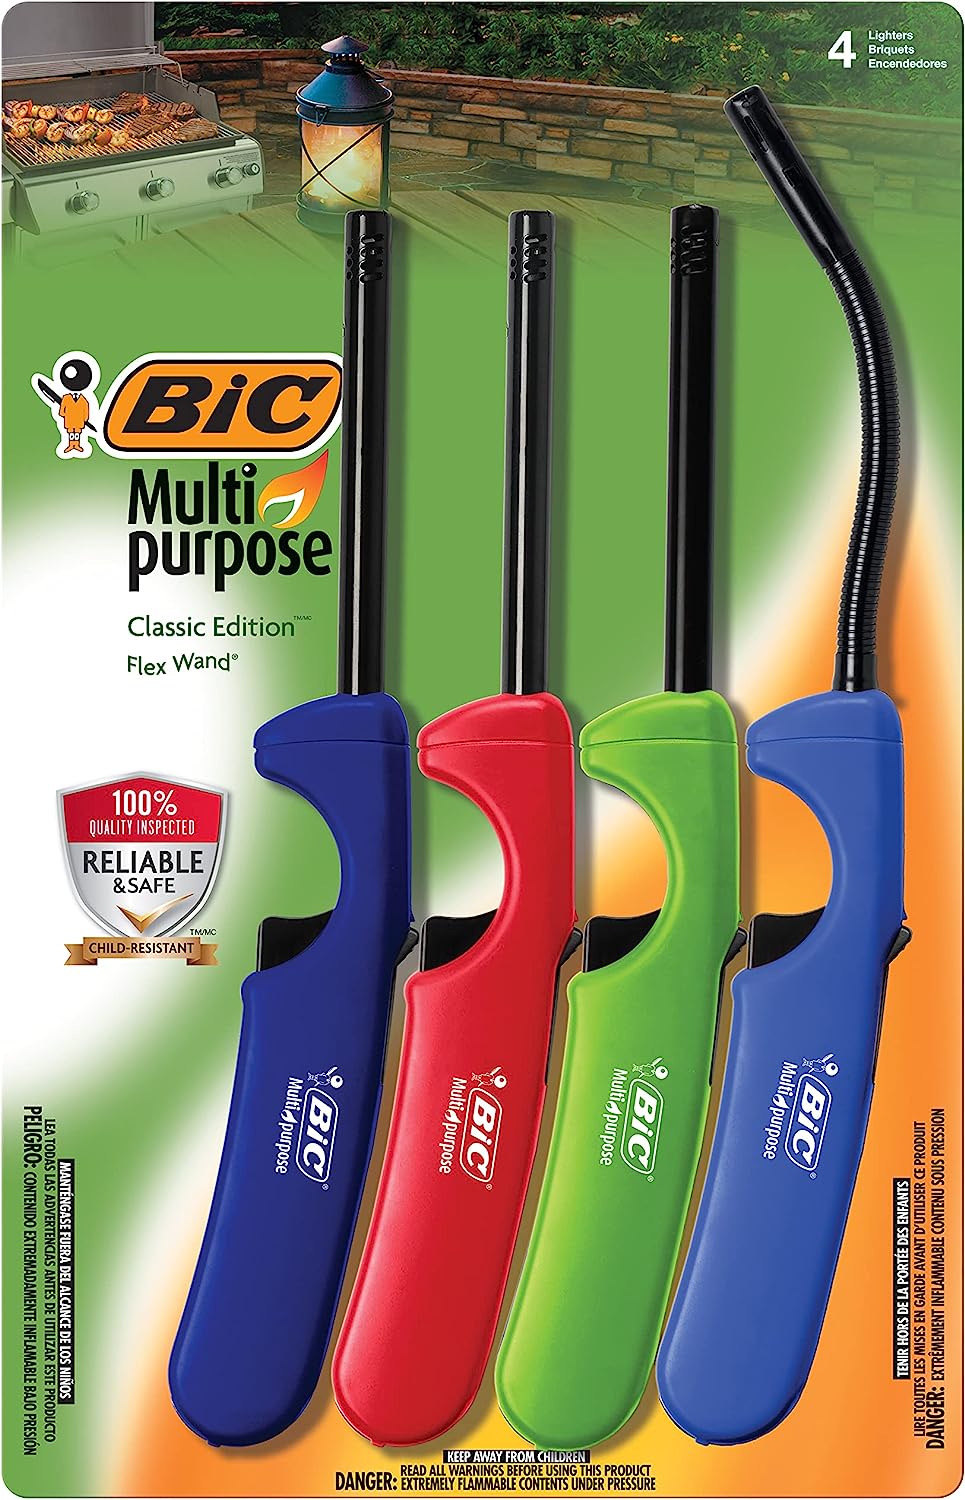 BiC Multi-Purpose Lighter - 4 Lighter Value Pack with [...]